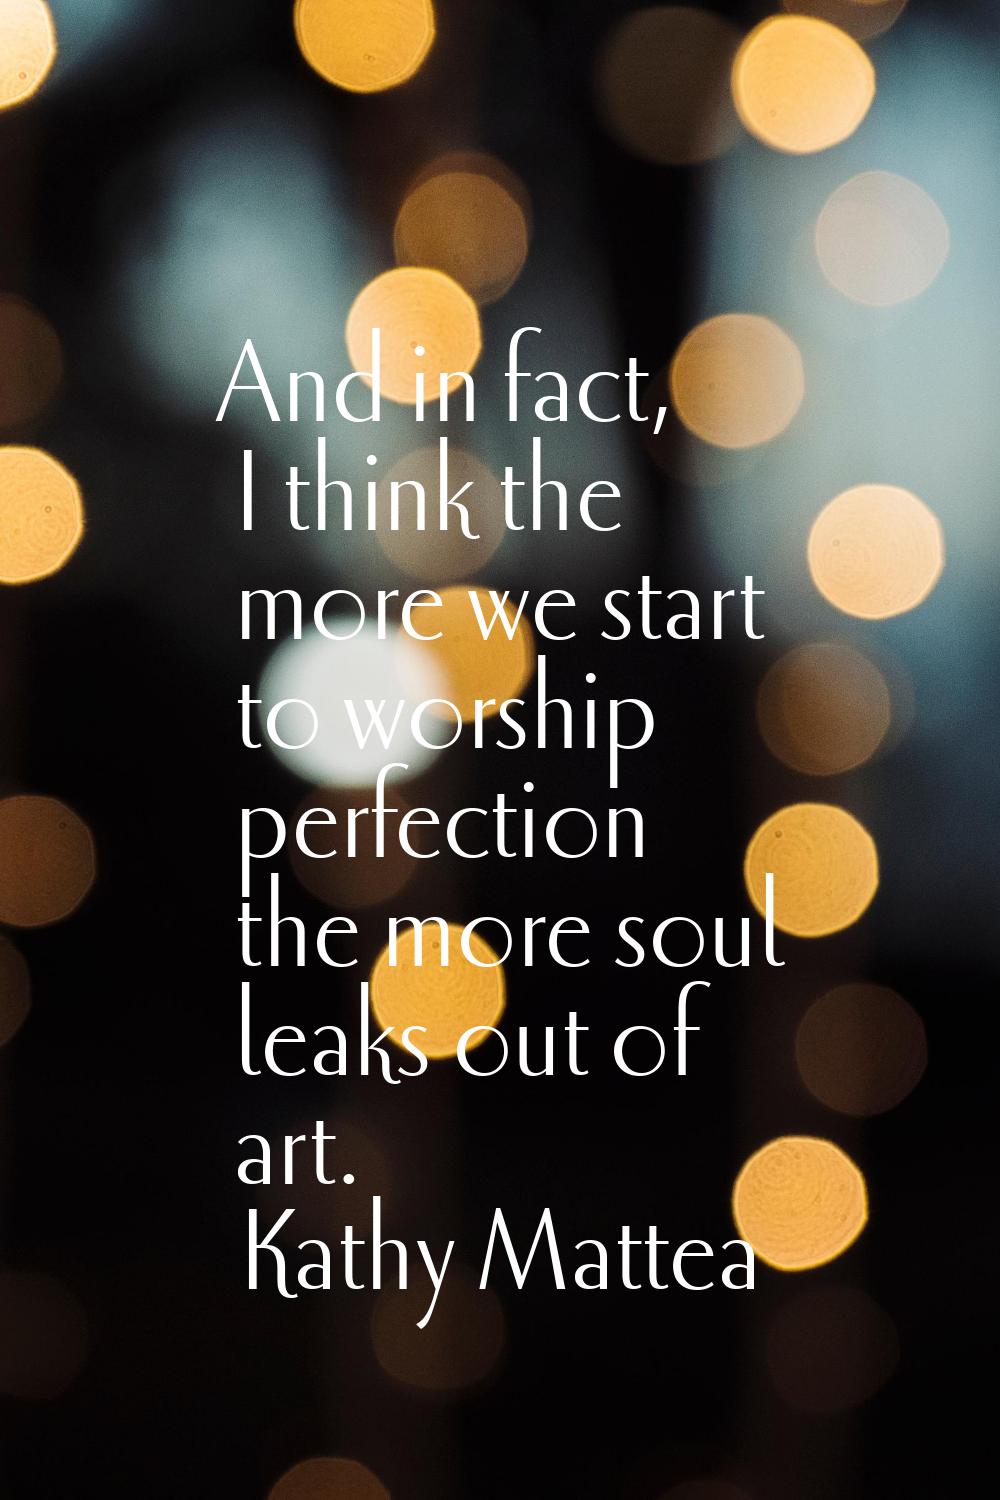 And in fact, I think the more we start to worship perfection the more soul leaks out of art.